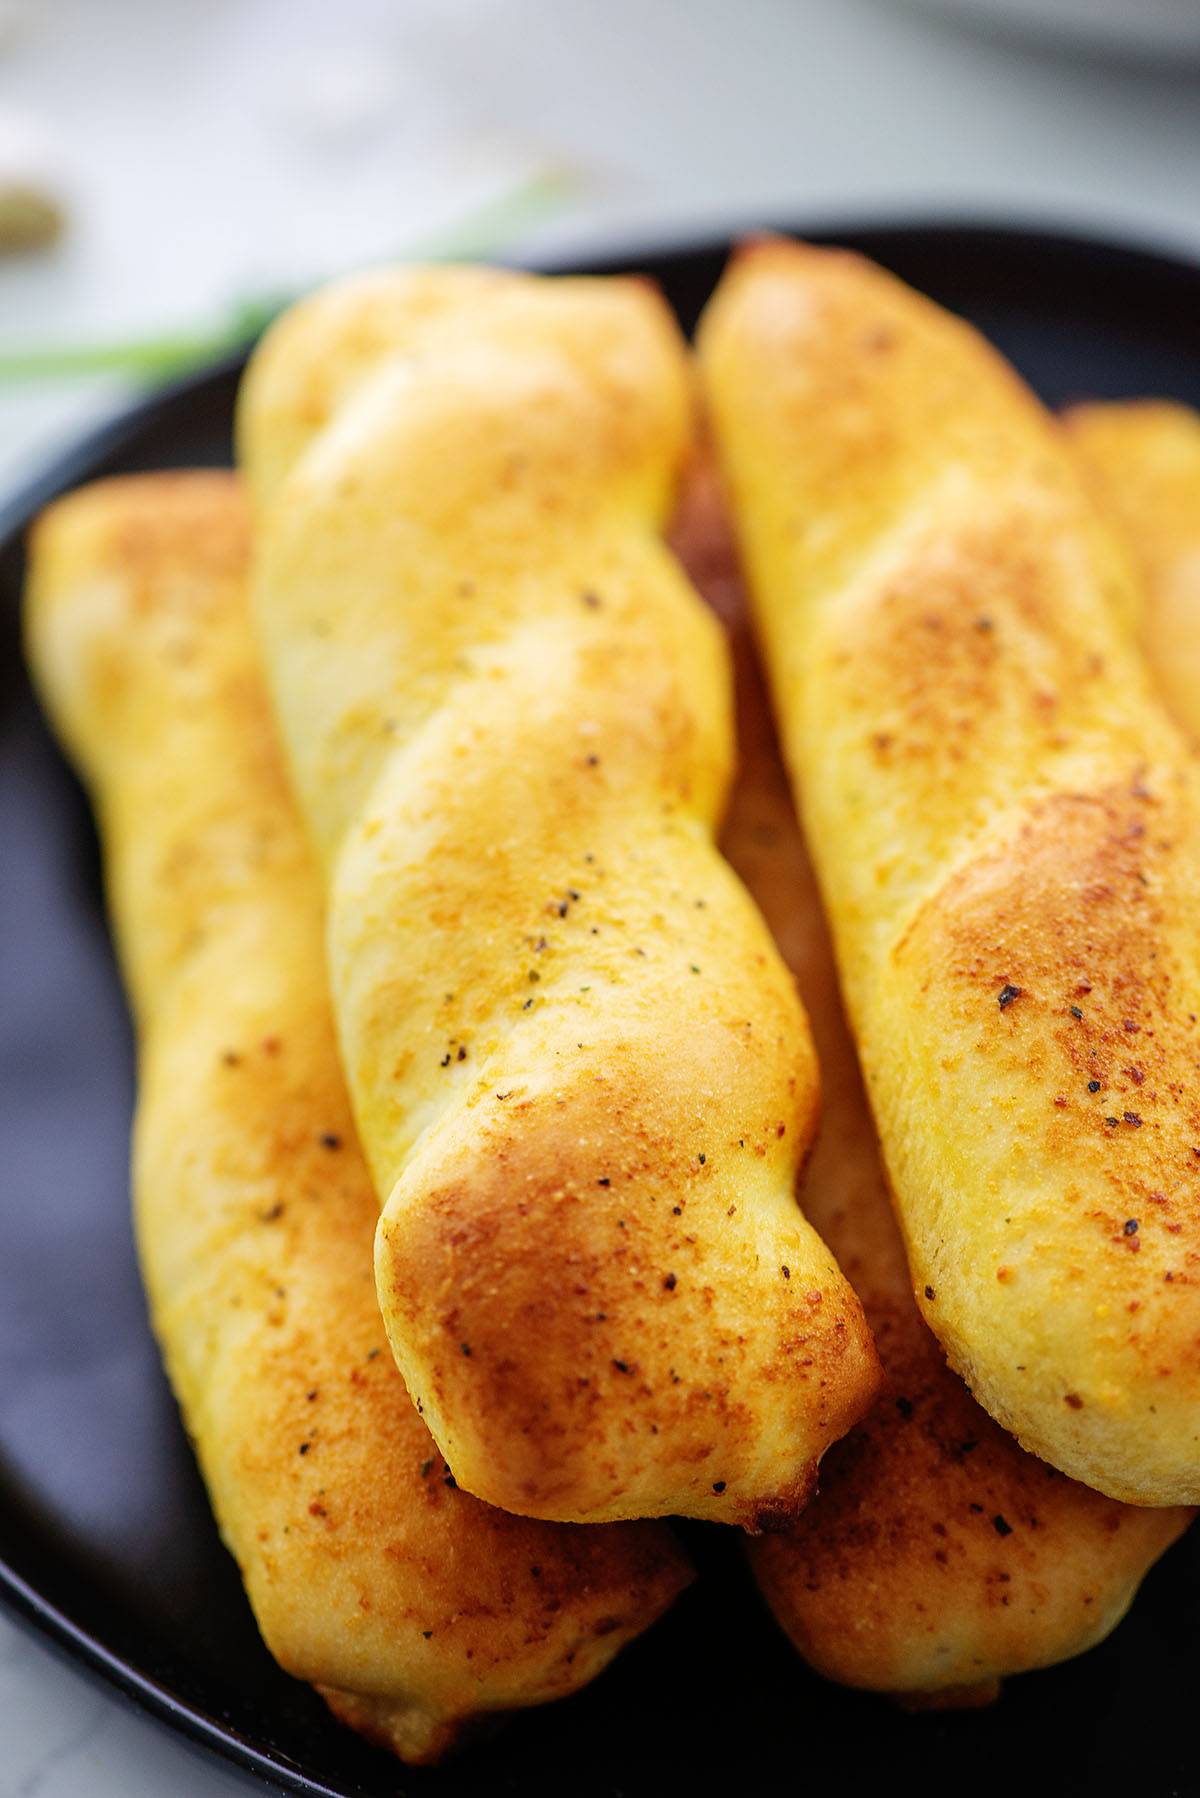 A pile of breadsticks on a small black plate.